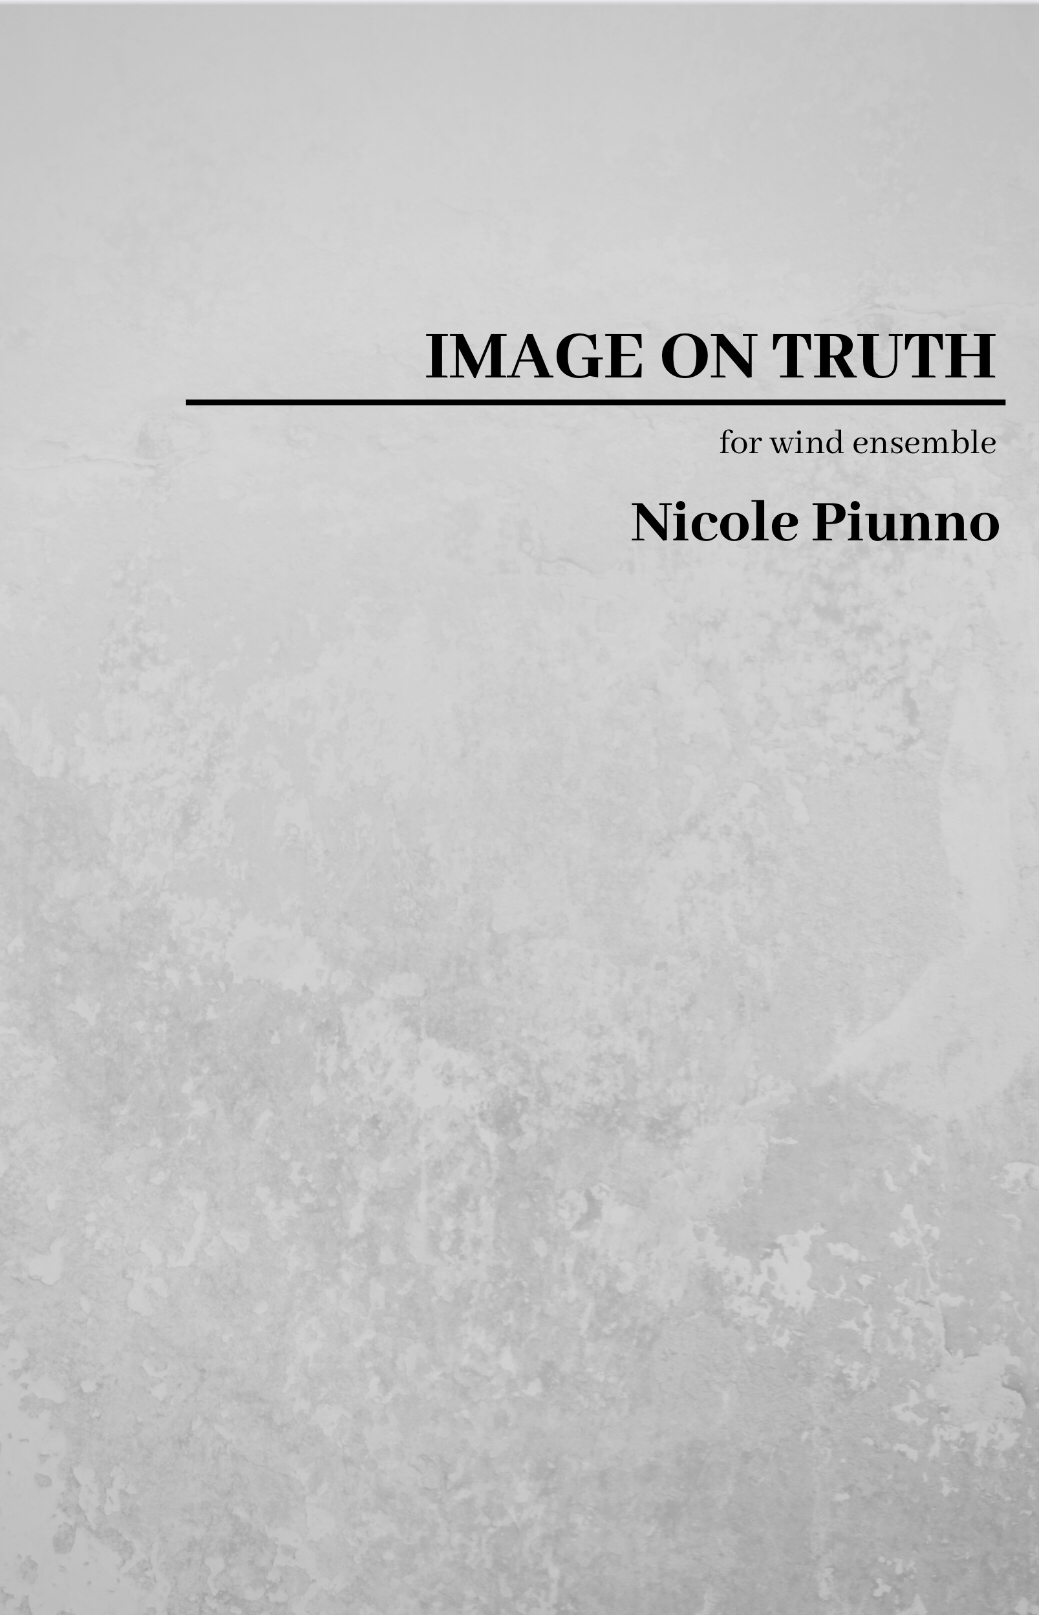 Image On Truth (Score Only) by Nicole Piunno